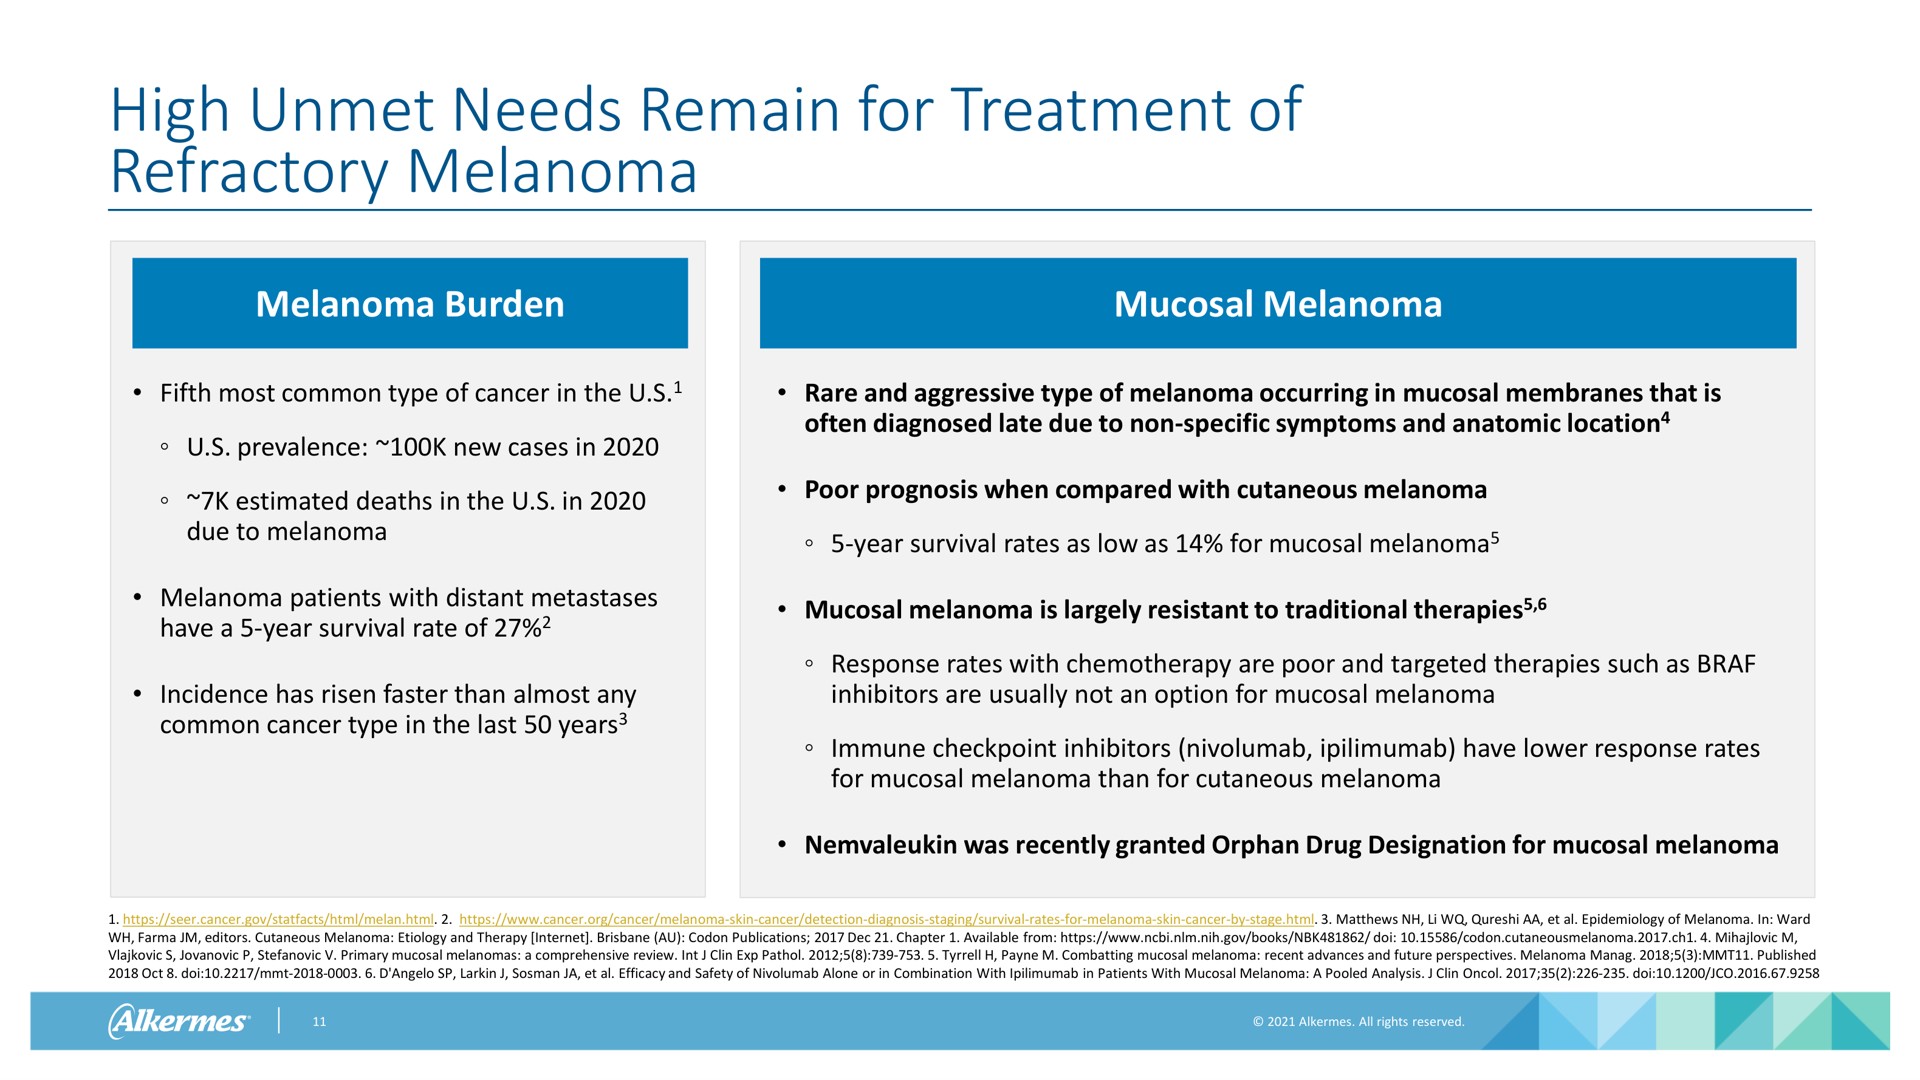 high unmet needs remain for treatment of refractory melanoma melanoma burden mucosal melanoma fifth most common type of cancer in the prevalence new cases in estimated deaths in the in due to melanoma melanoma patients with distant metastases have a year survival rate of incidence has risen faster than almost any common cancer type in the last years rare and aggressive type of melanoma occurring in mucosal membranes that is often diagnosed late due to non specific symptoms and anatomic location poor prognosis when compared with cutaneous melanoma year survival rates as low as for mucosal melanoma mucosal melanoma is largely resistant to traditional therapies response rates with chemotherapy are poor and targeted therapies such as inhibitors are usually not an option for mucosal melanoma immune inhibitors have lower response rates for mucosal melanoma than for cutaneous melanoma was recently granted orphan drug designation for mucosal melanoma epidemiology of melanoma in ward editors cutaneous melanoma etiology and therapy codon publications chapter available from codon primary mucosal melanomas a comprehensive review combatting mucosal melanoma recent advances and future perspectives melanoma published efficacy and safety of alone or in combination with in patients with mucosal melanoma a pooled analysis be eat location parle lene at years | Alkermes